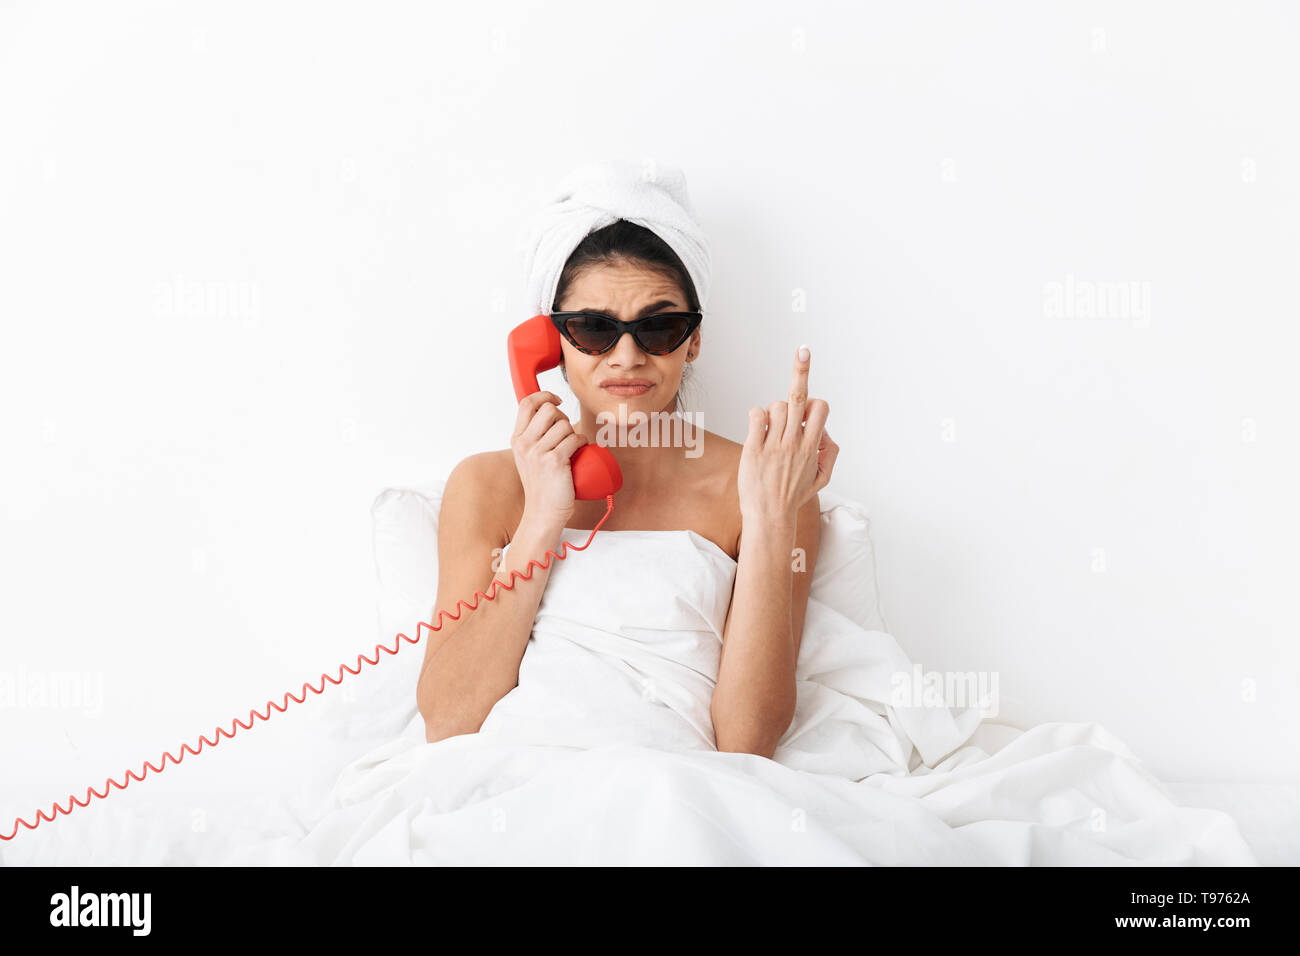 Upset young woman sitting in bed after shower wrapped in blanket, wearing sunglasses, talking on a landline phone Stock Photo